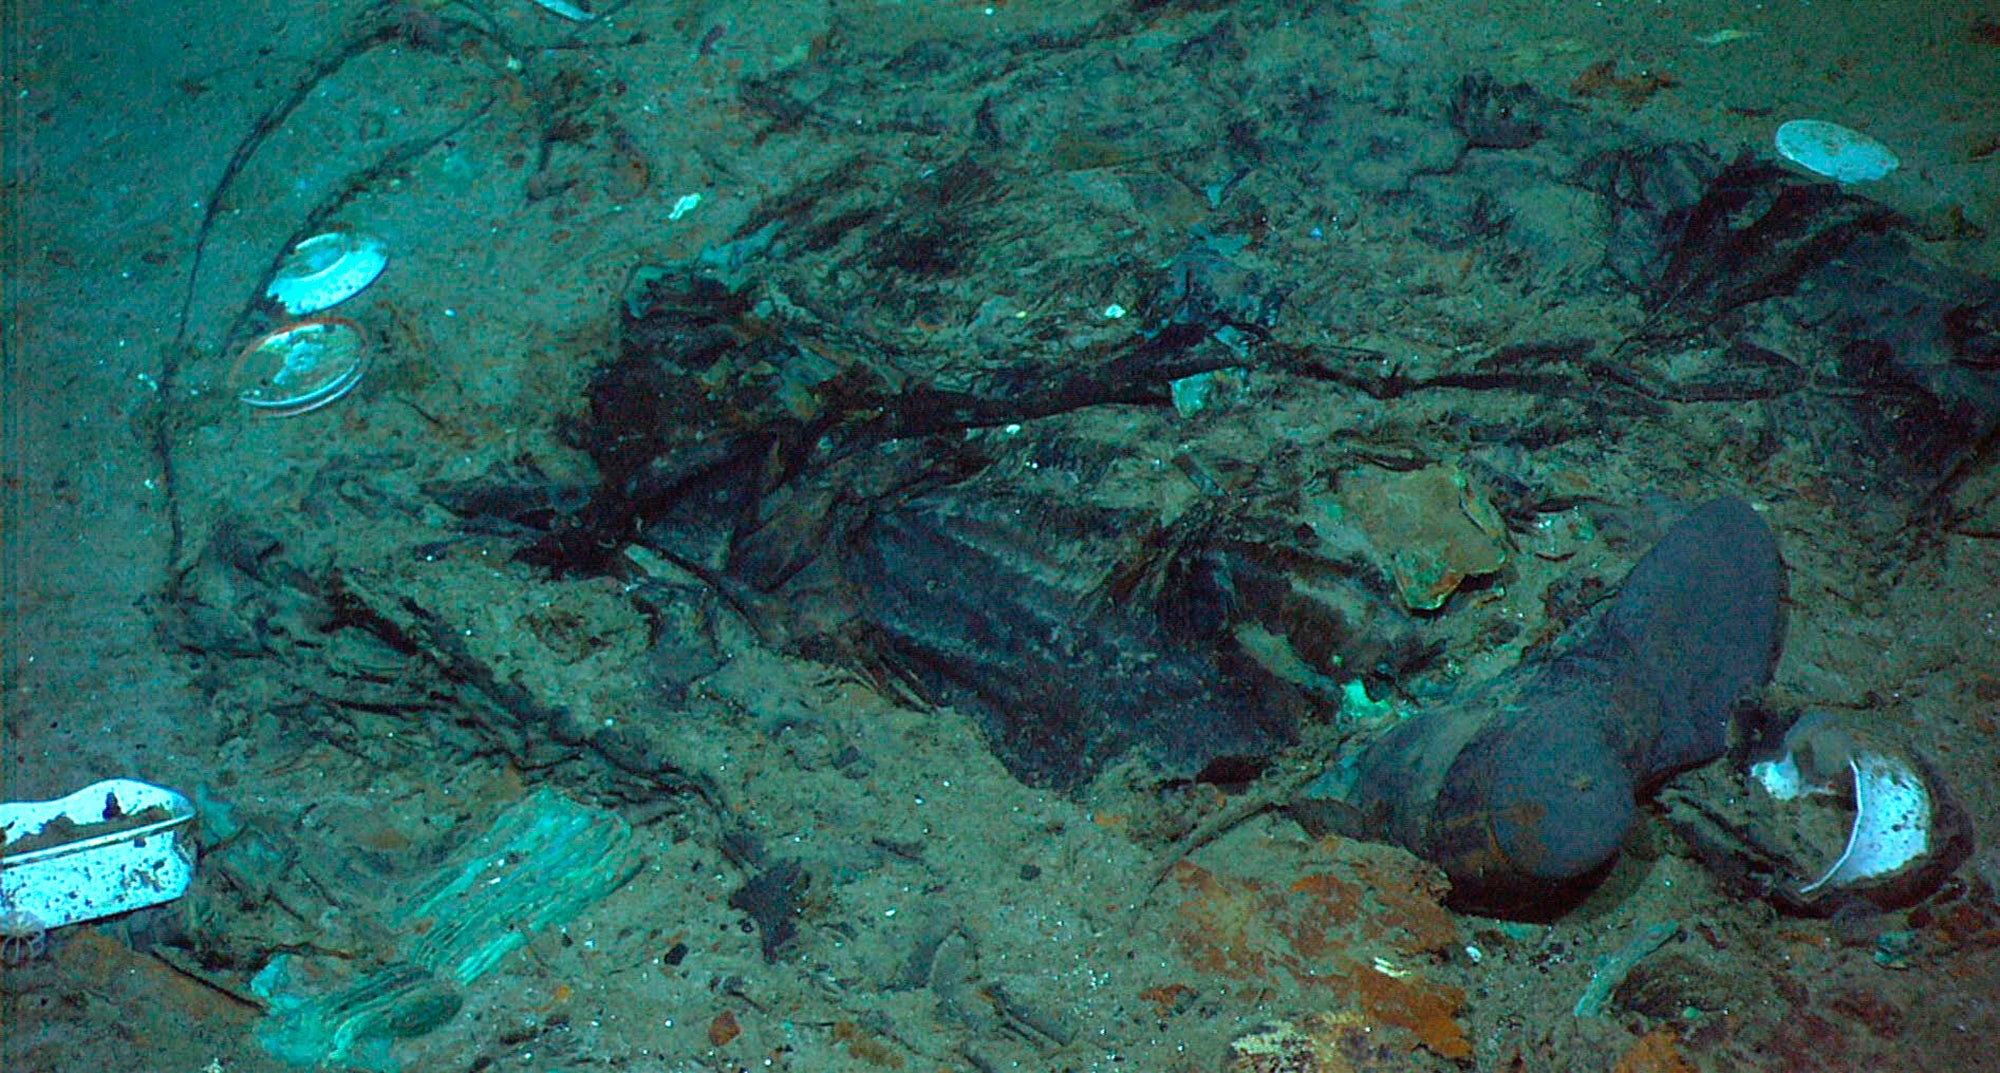 RMS Titanic Inc plans to document the debris field and identify potential objects for recovery.